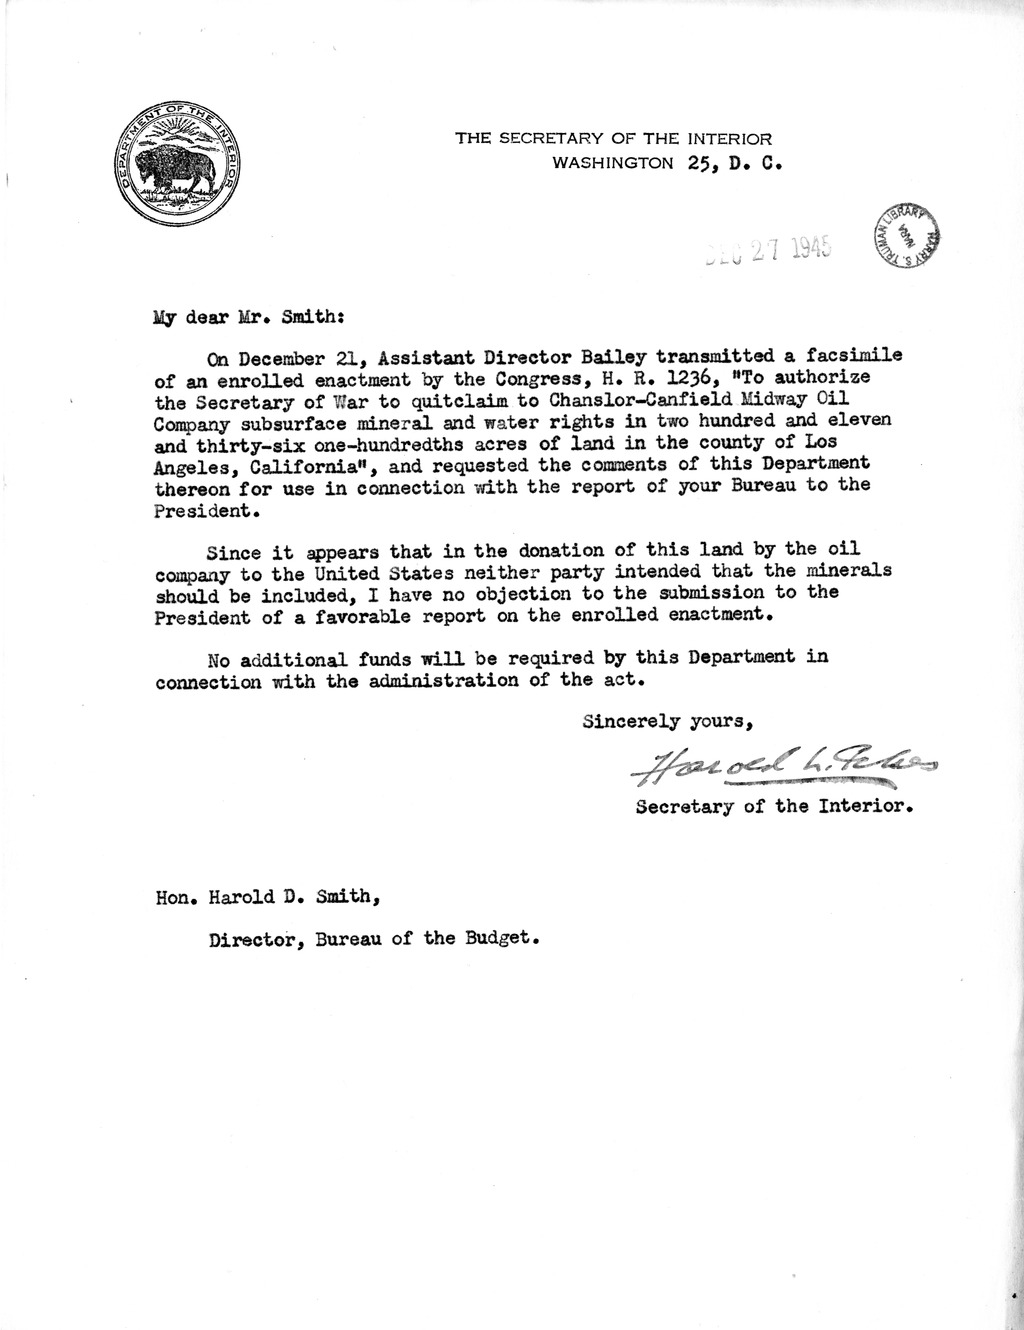 Memorandum from Harold D. Smith to M. C. Latta, H. R. 1236, To Authorize the Secretary of War to Quitclaim to Chanslor-Canfield Midway Oil Company Subsurface Mineral and Water Rights in Two Hundred and Eleven and Thirty-six One-Hundredths Acres of Land in the County of Los Angeles, California, with Attachments